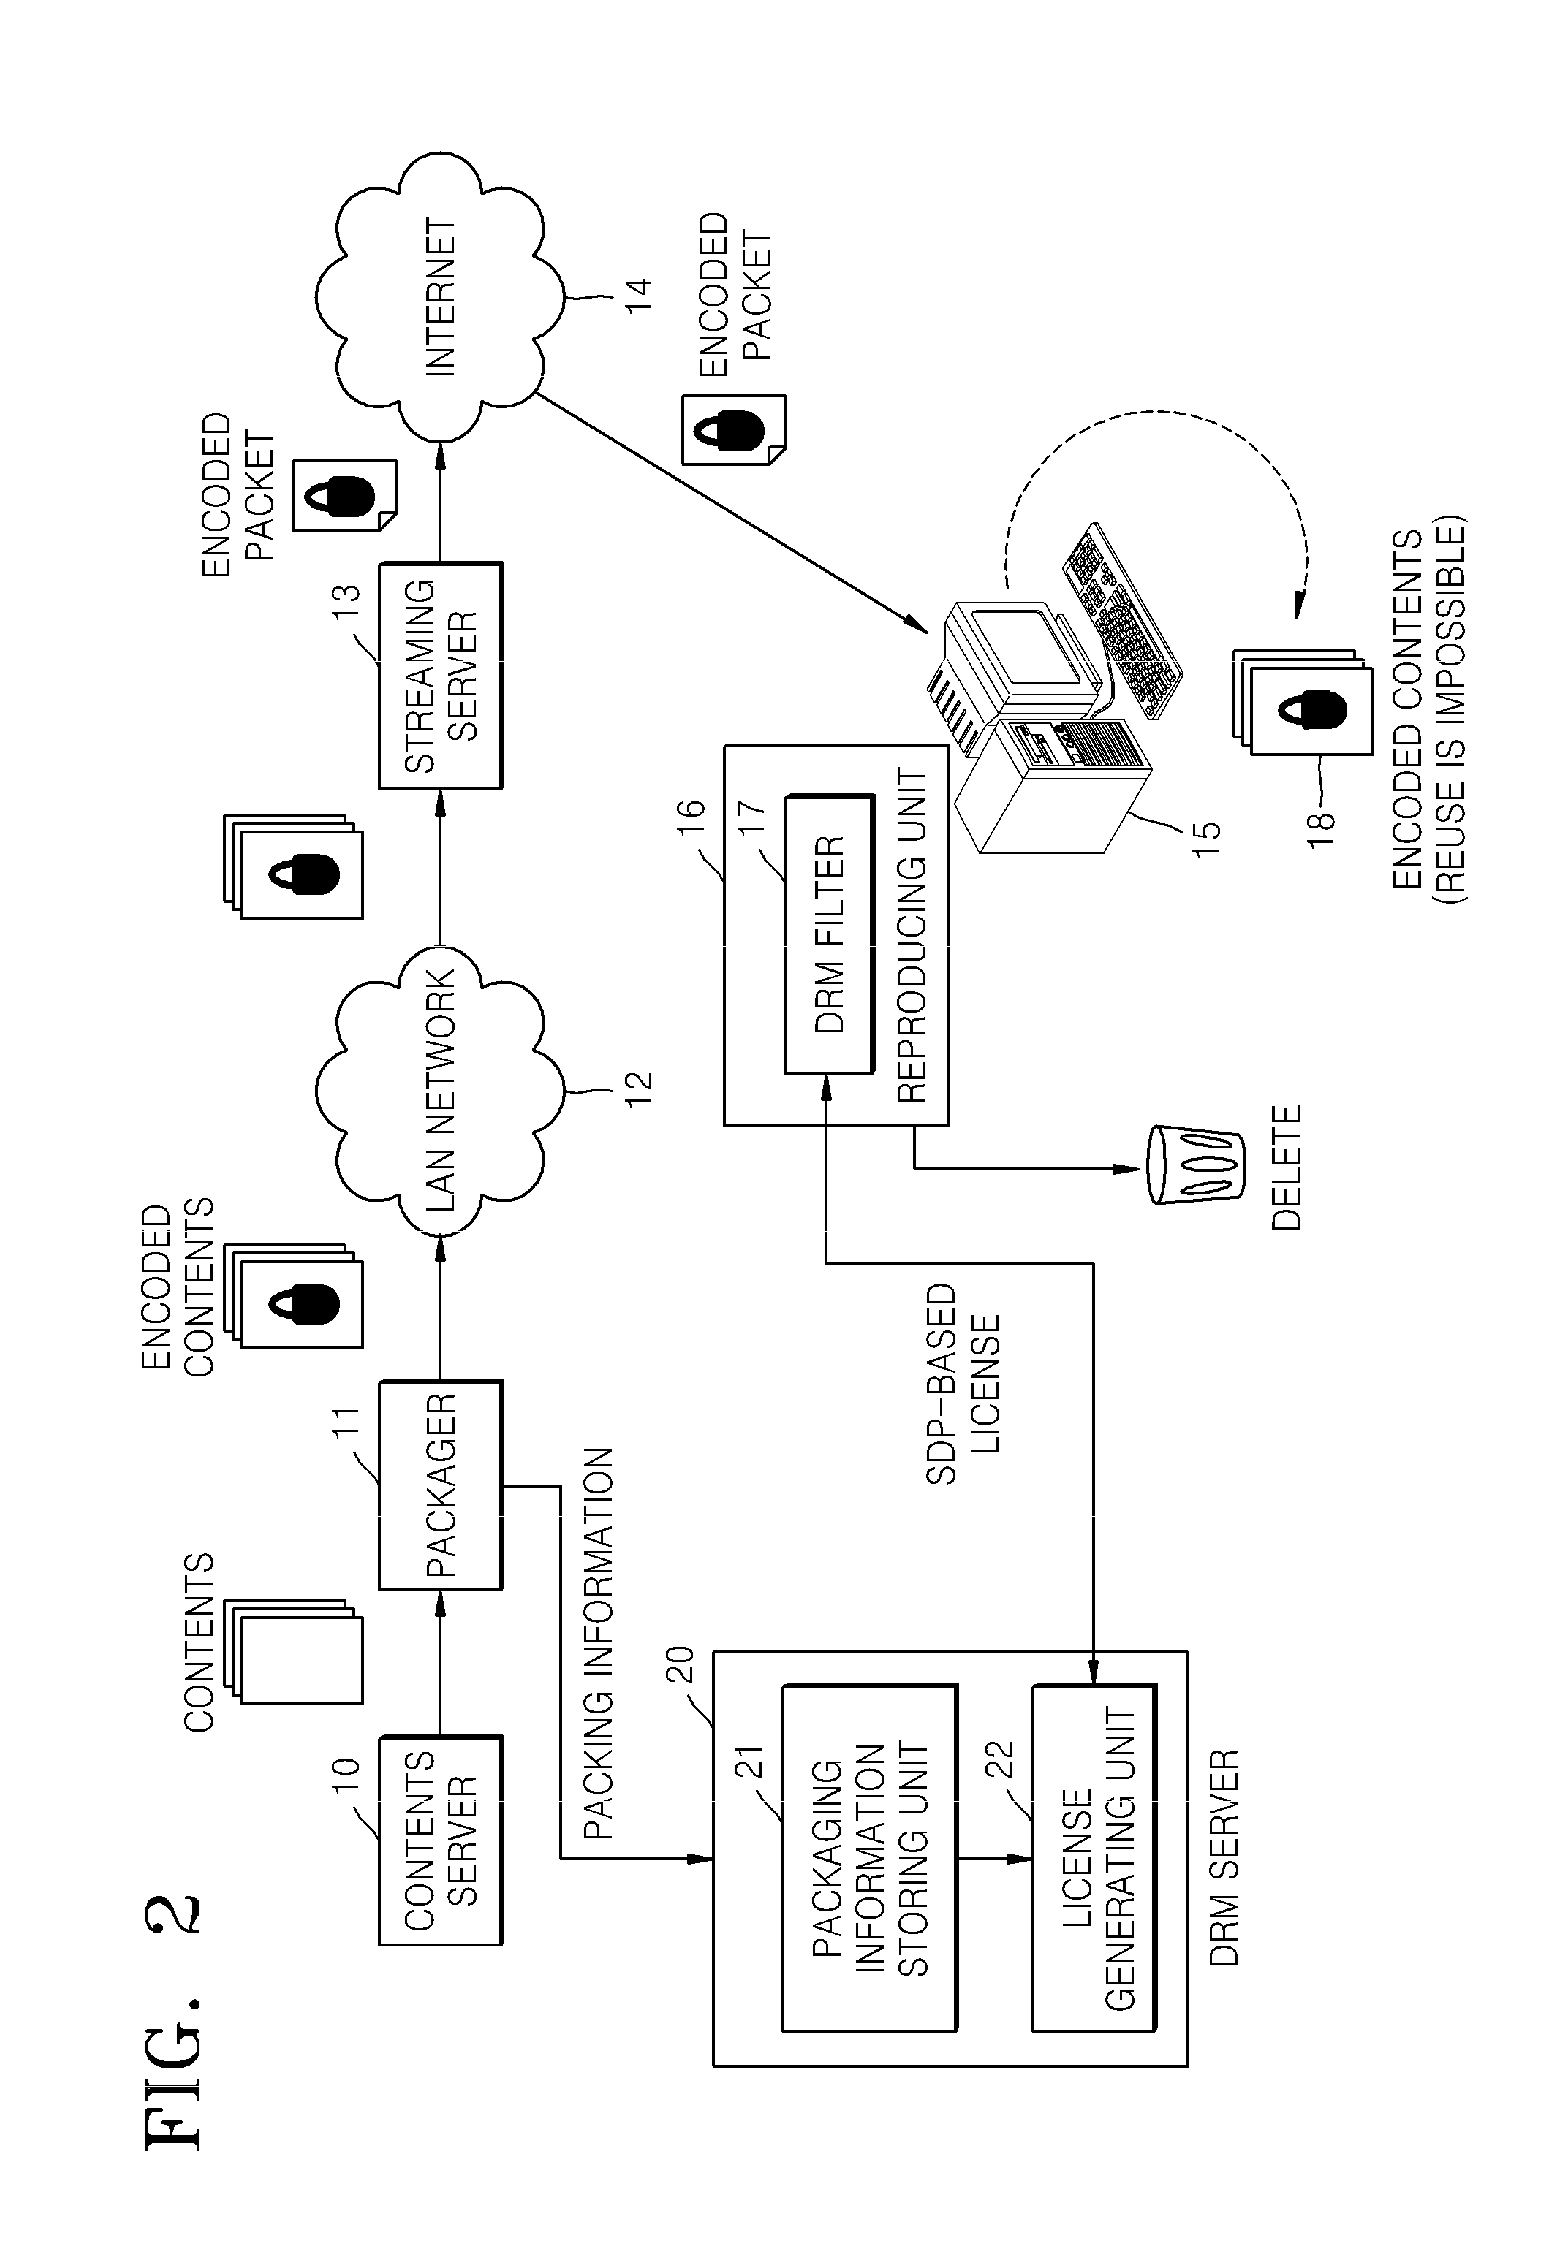 System and method of protecting digital media contents